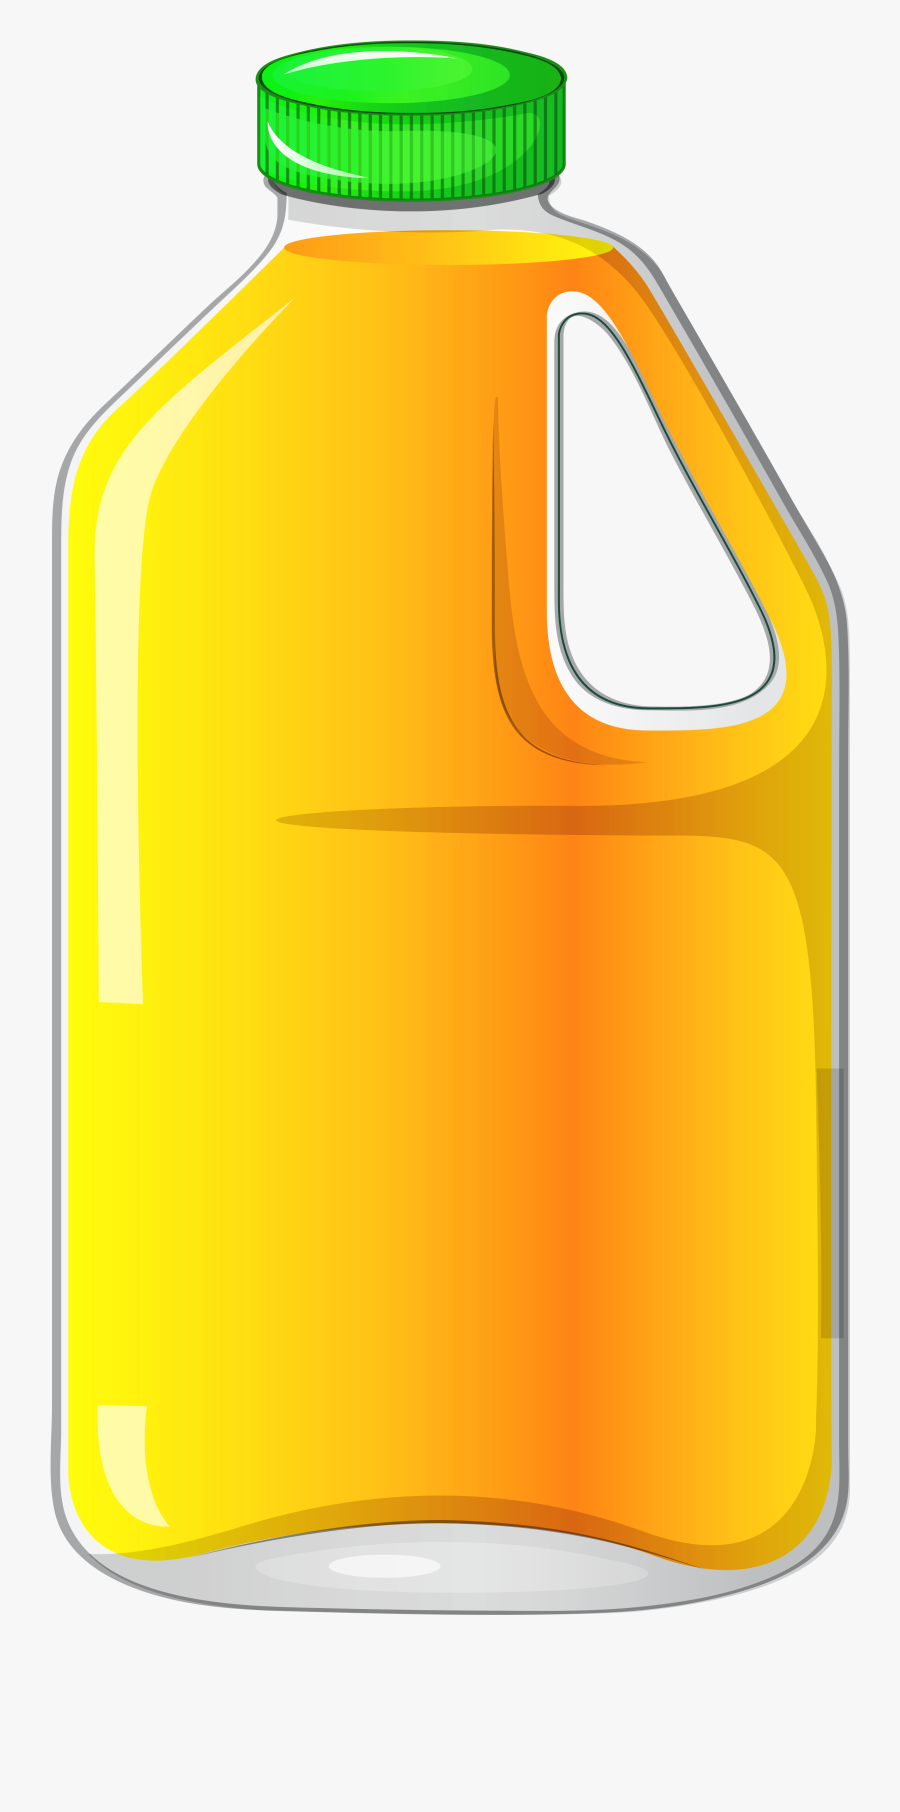 Large Bottle With Orange Juice Clipart Gallery Yopriceville - Orange Juice Bottle Clipart, Transparent Clipart